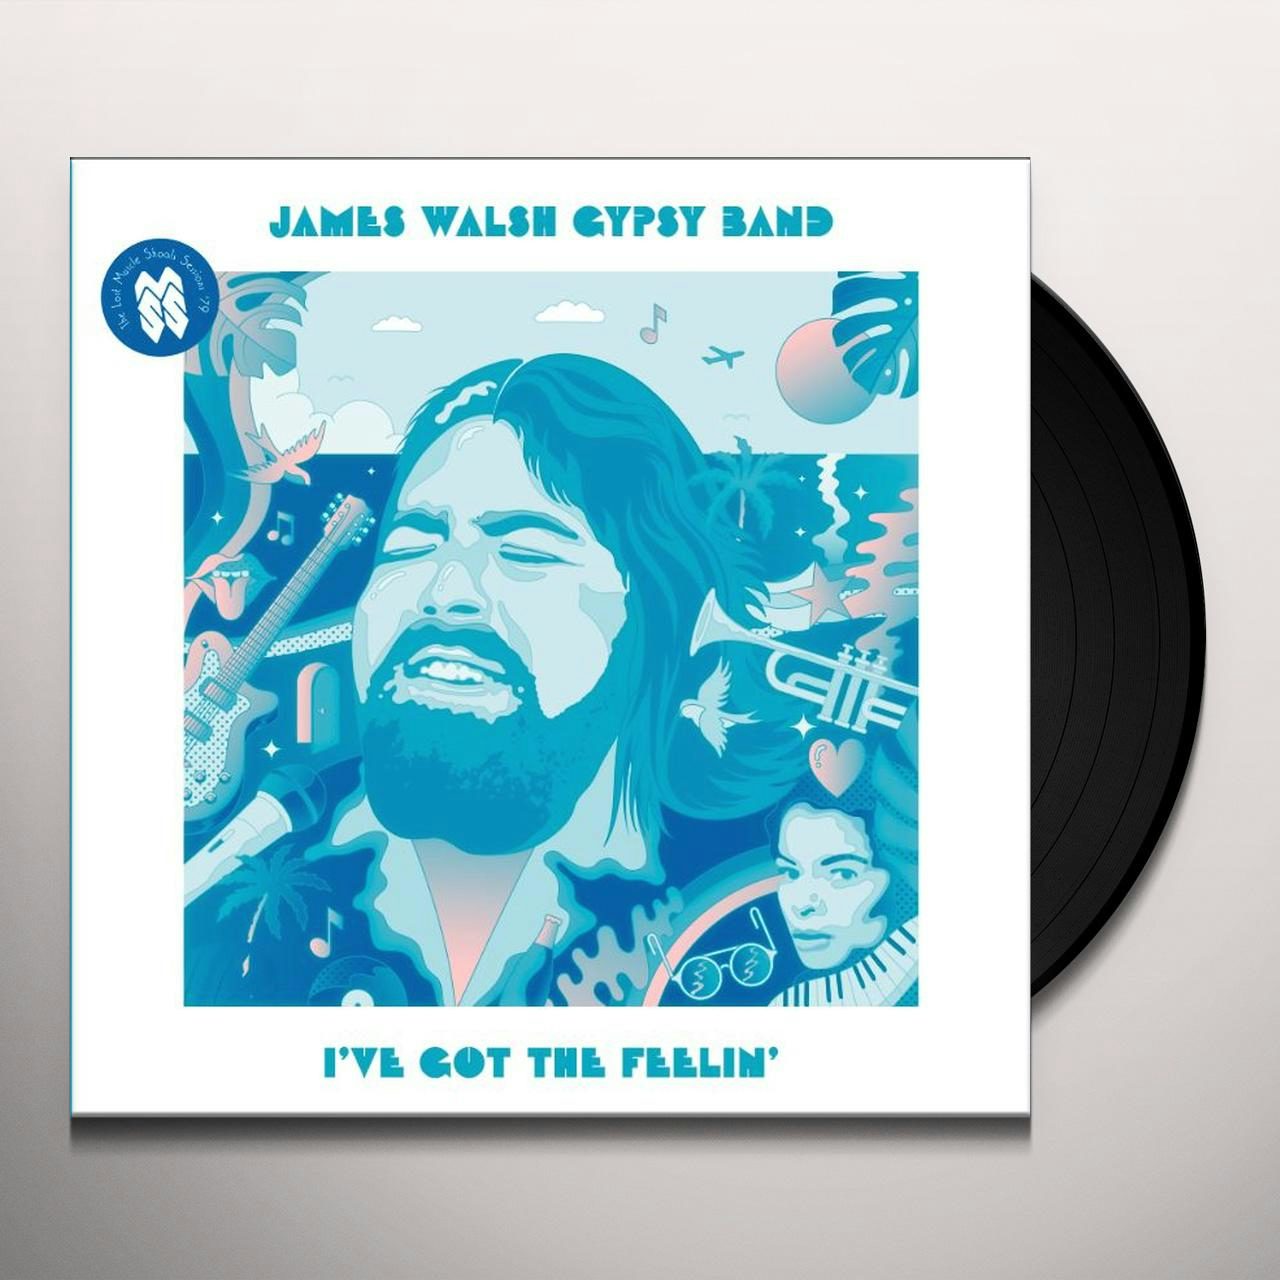 James Walsh Gypsy Band Store: Official Merch & Vinyl